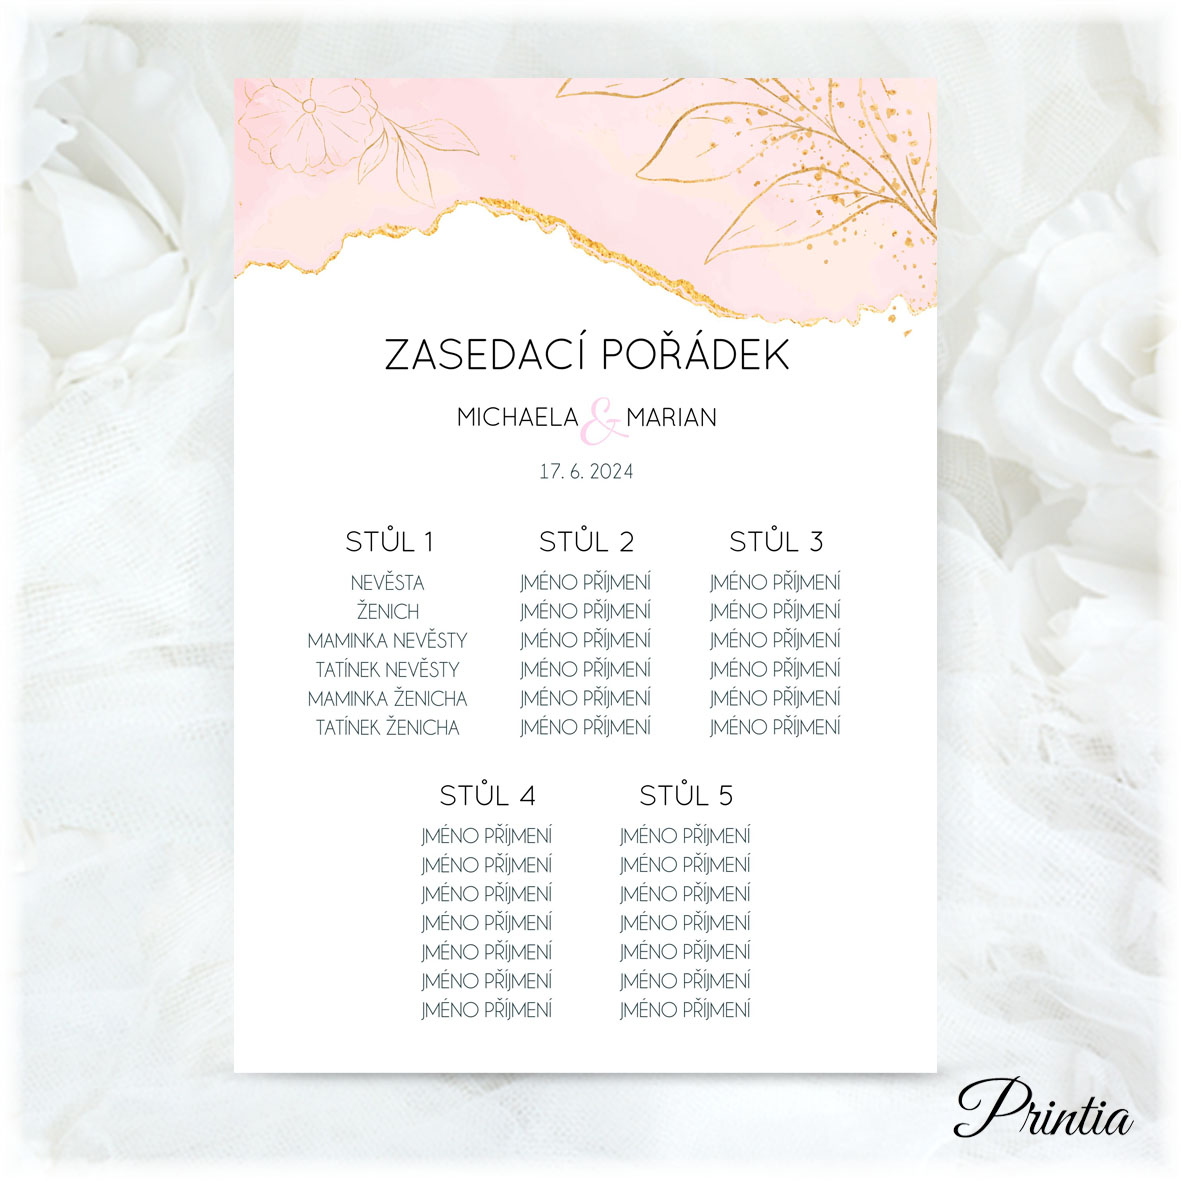 Wedding seating plan in shades of apricot